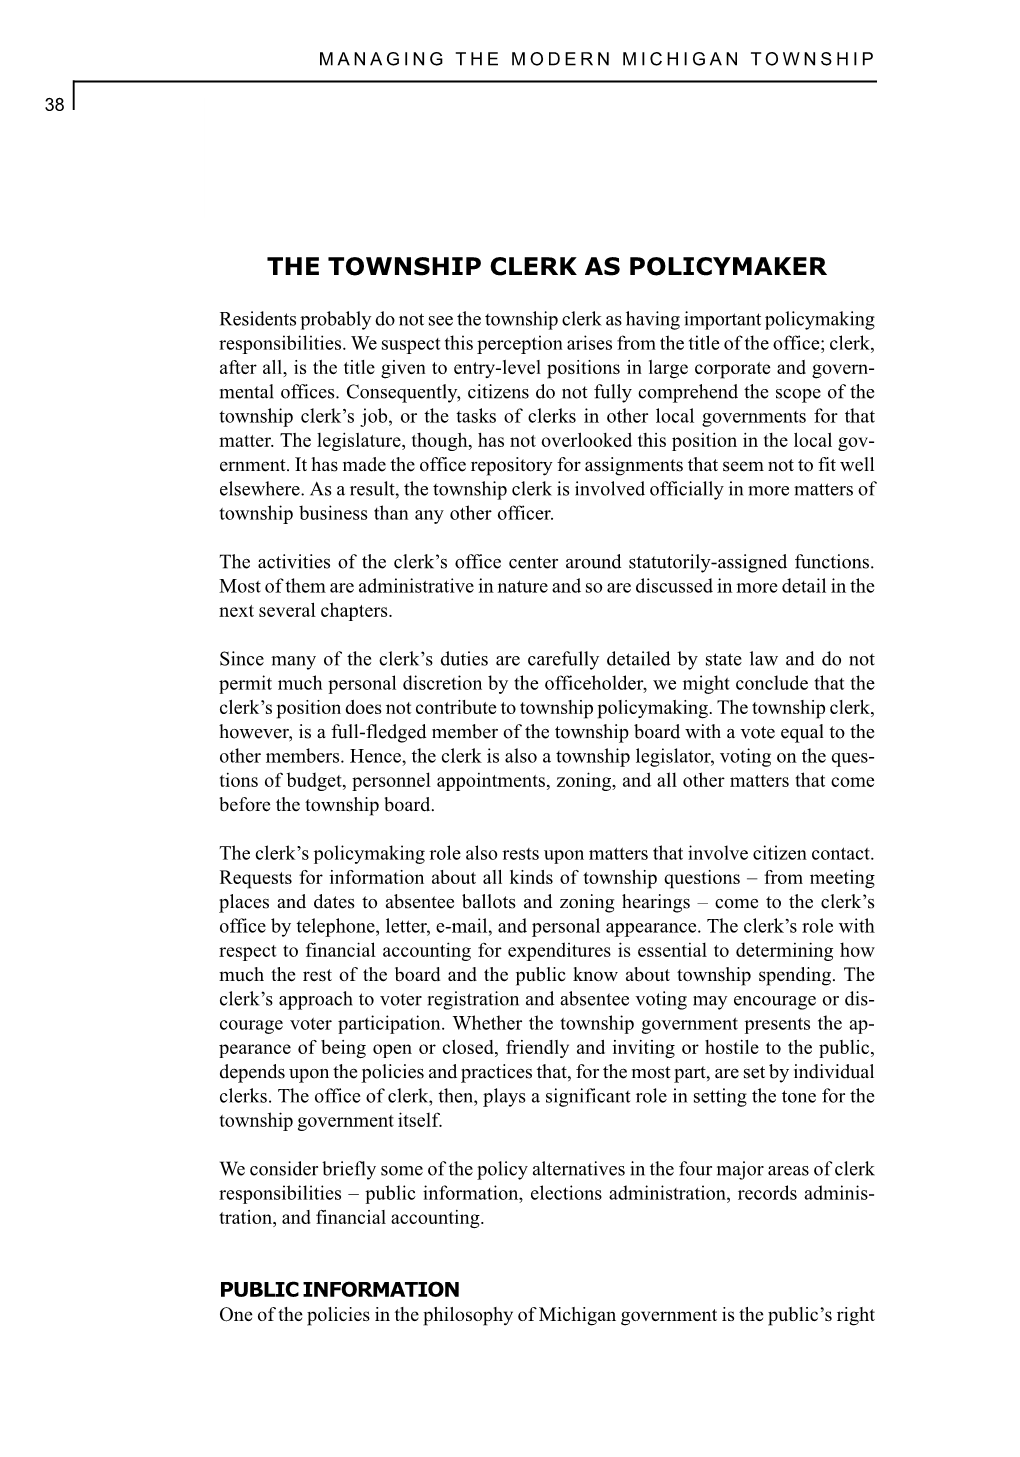 The Township Clerk As Policymaker